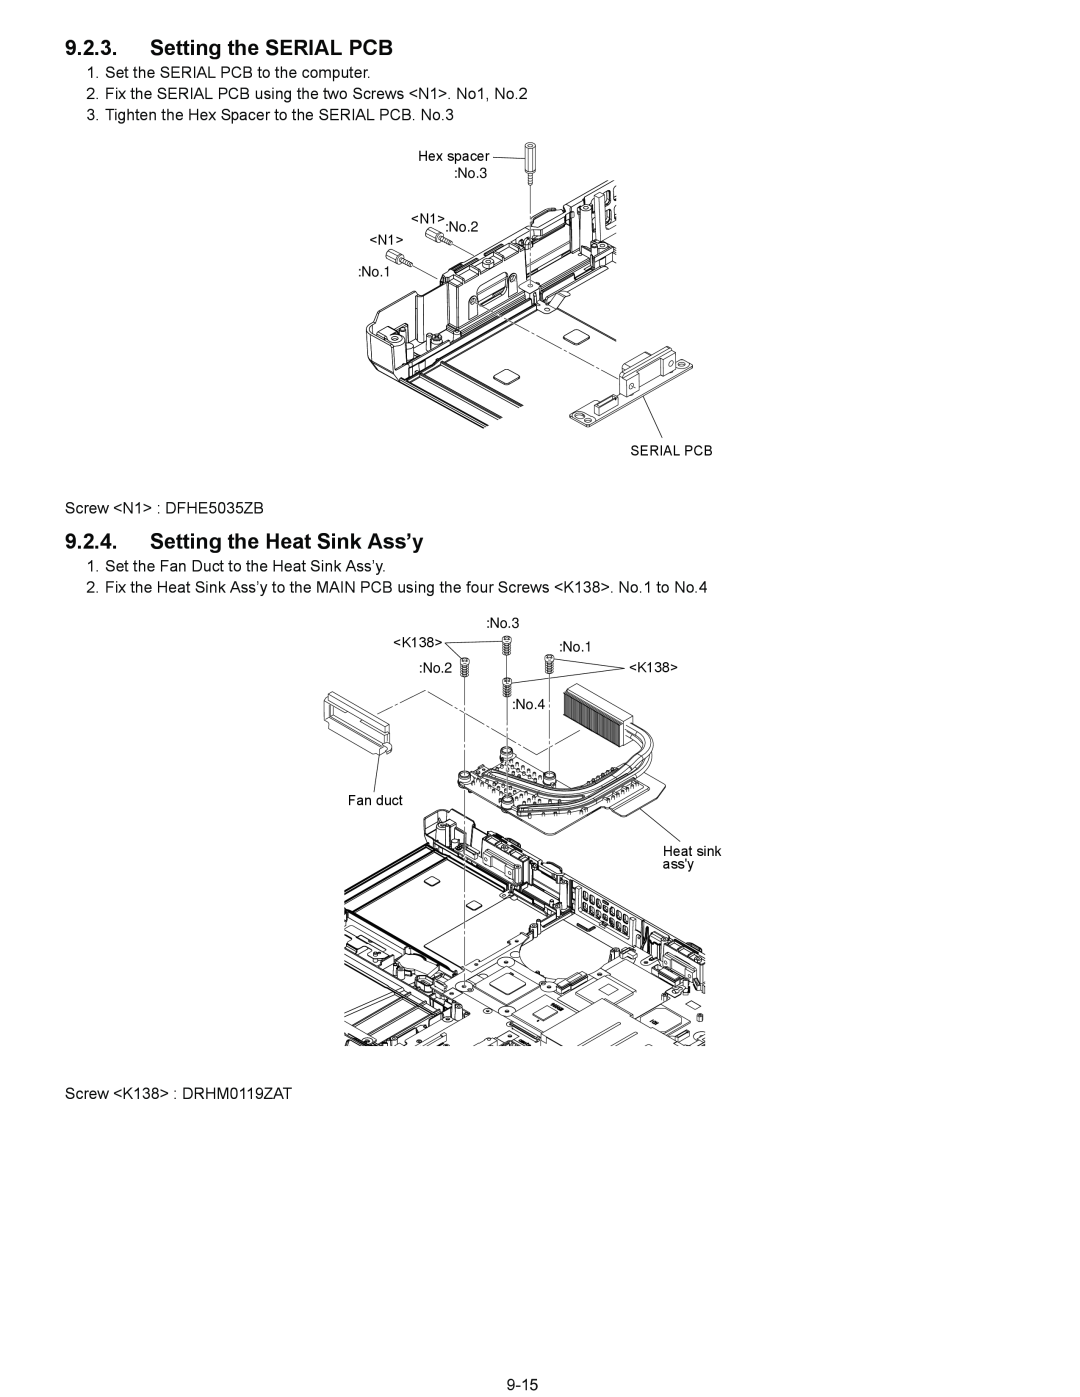 Panasonic CF-52EKM 1 D 2 M service manual Setting the SERIAL PCB, Setting the Heat Sink Ass’y, Hex spacer No.3 